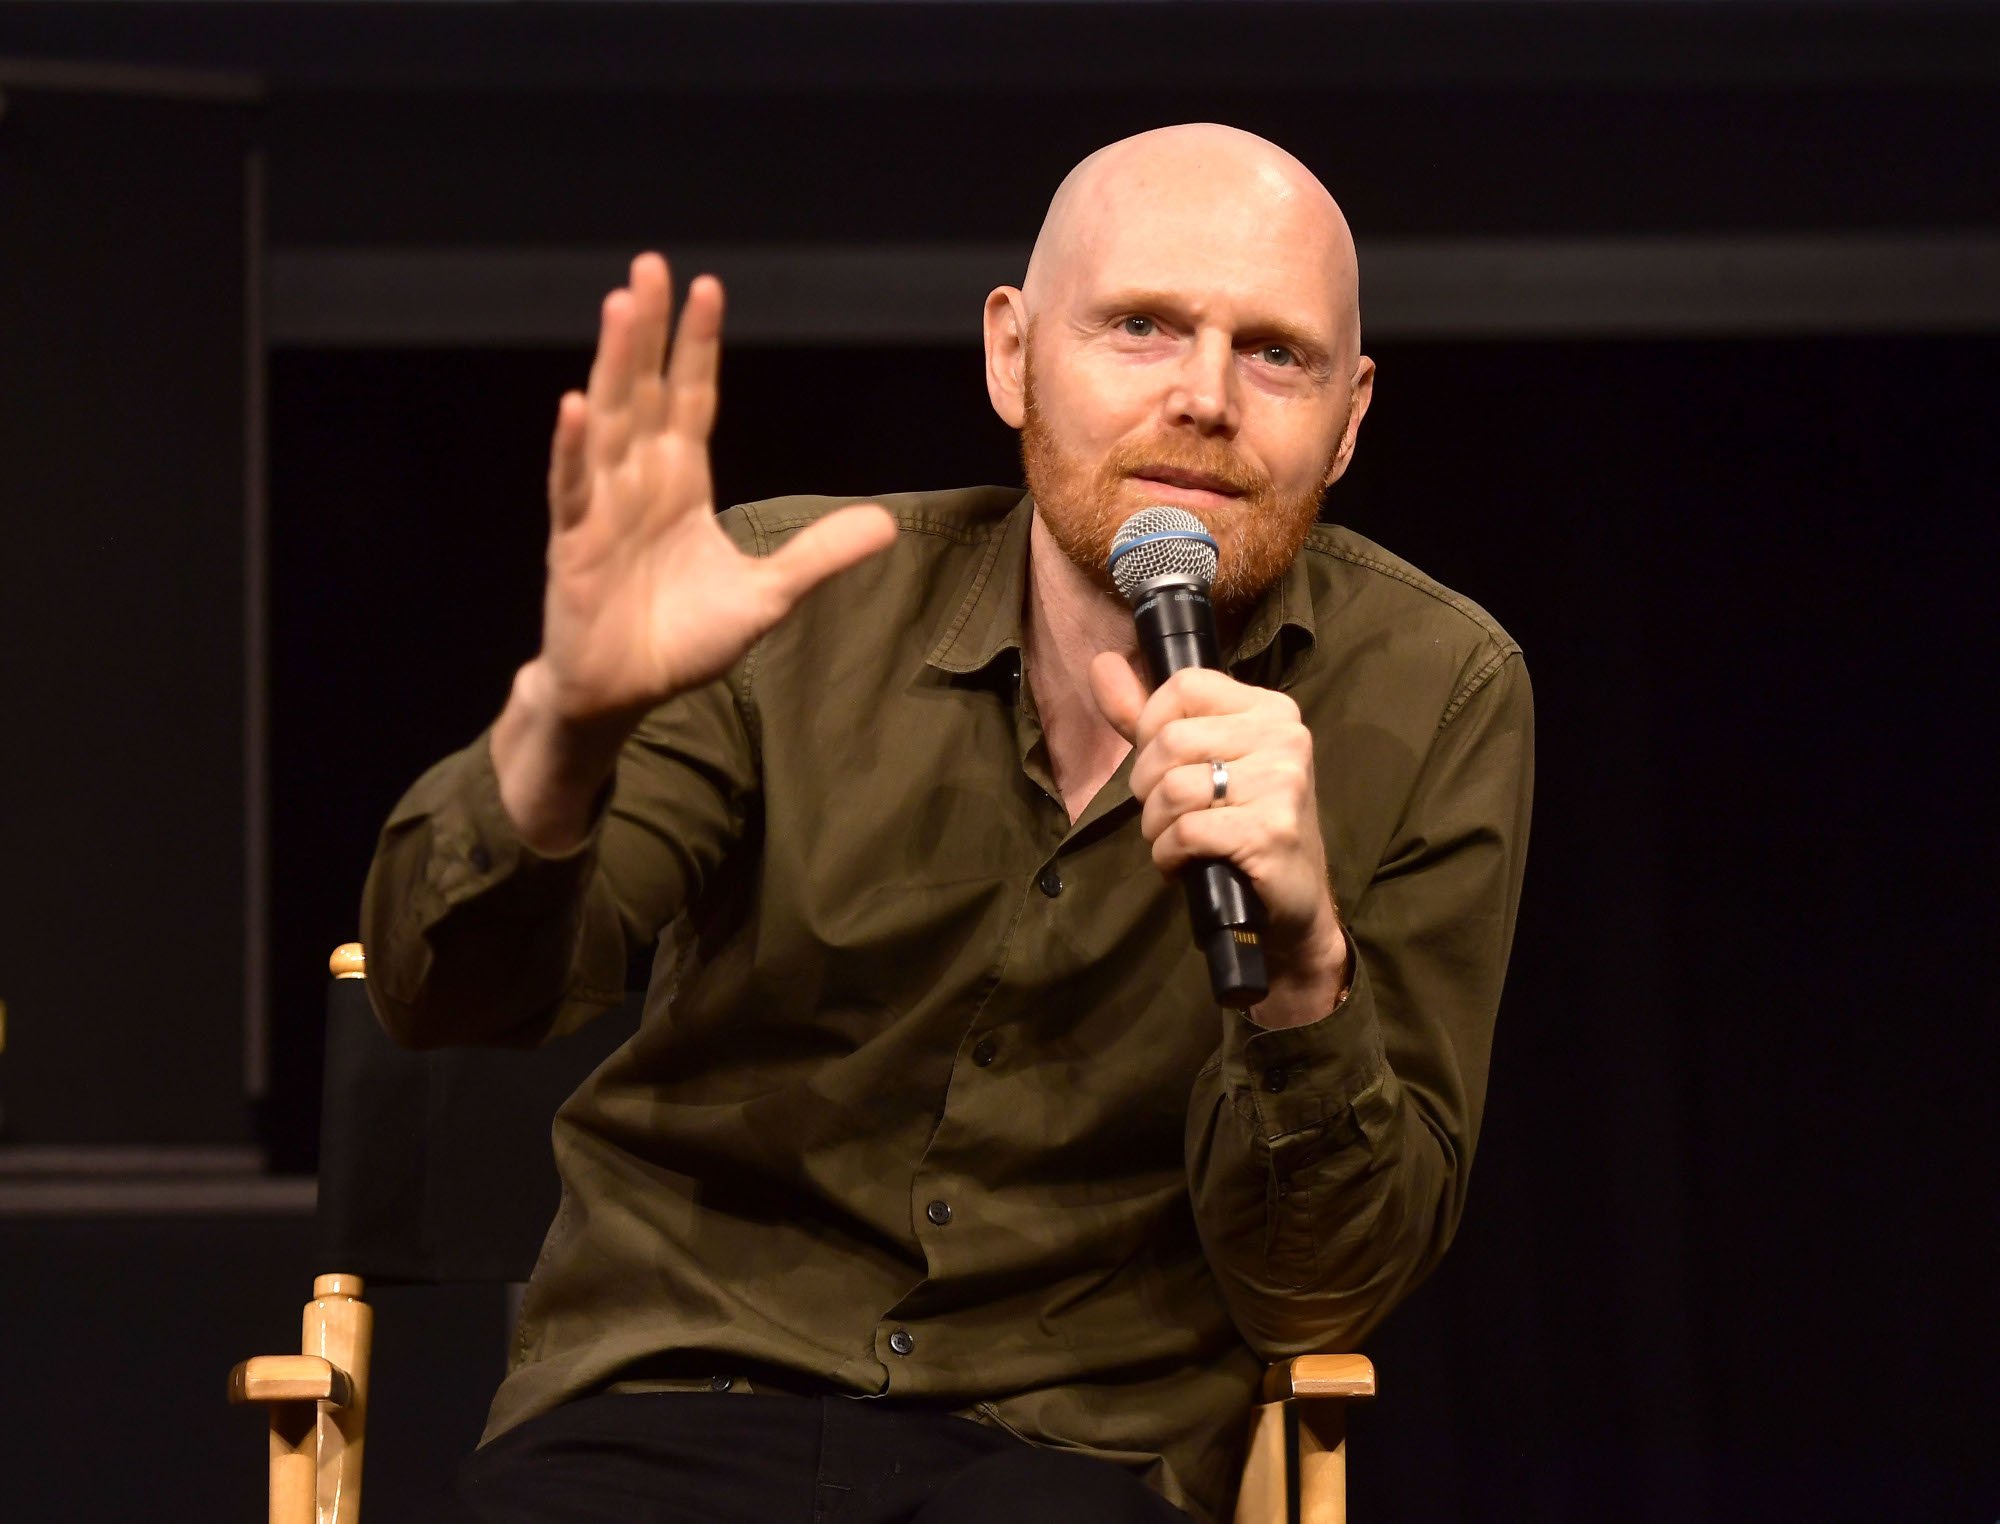 An image of Bill Burr wearing a brown shirt, holding one hand up, and speaking into a microphone for our article about whether he'll reprise his Breaking Bad role on Better Call Saul